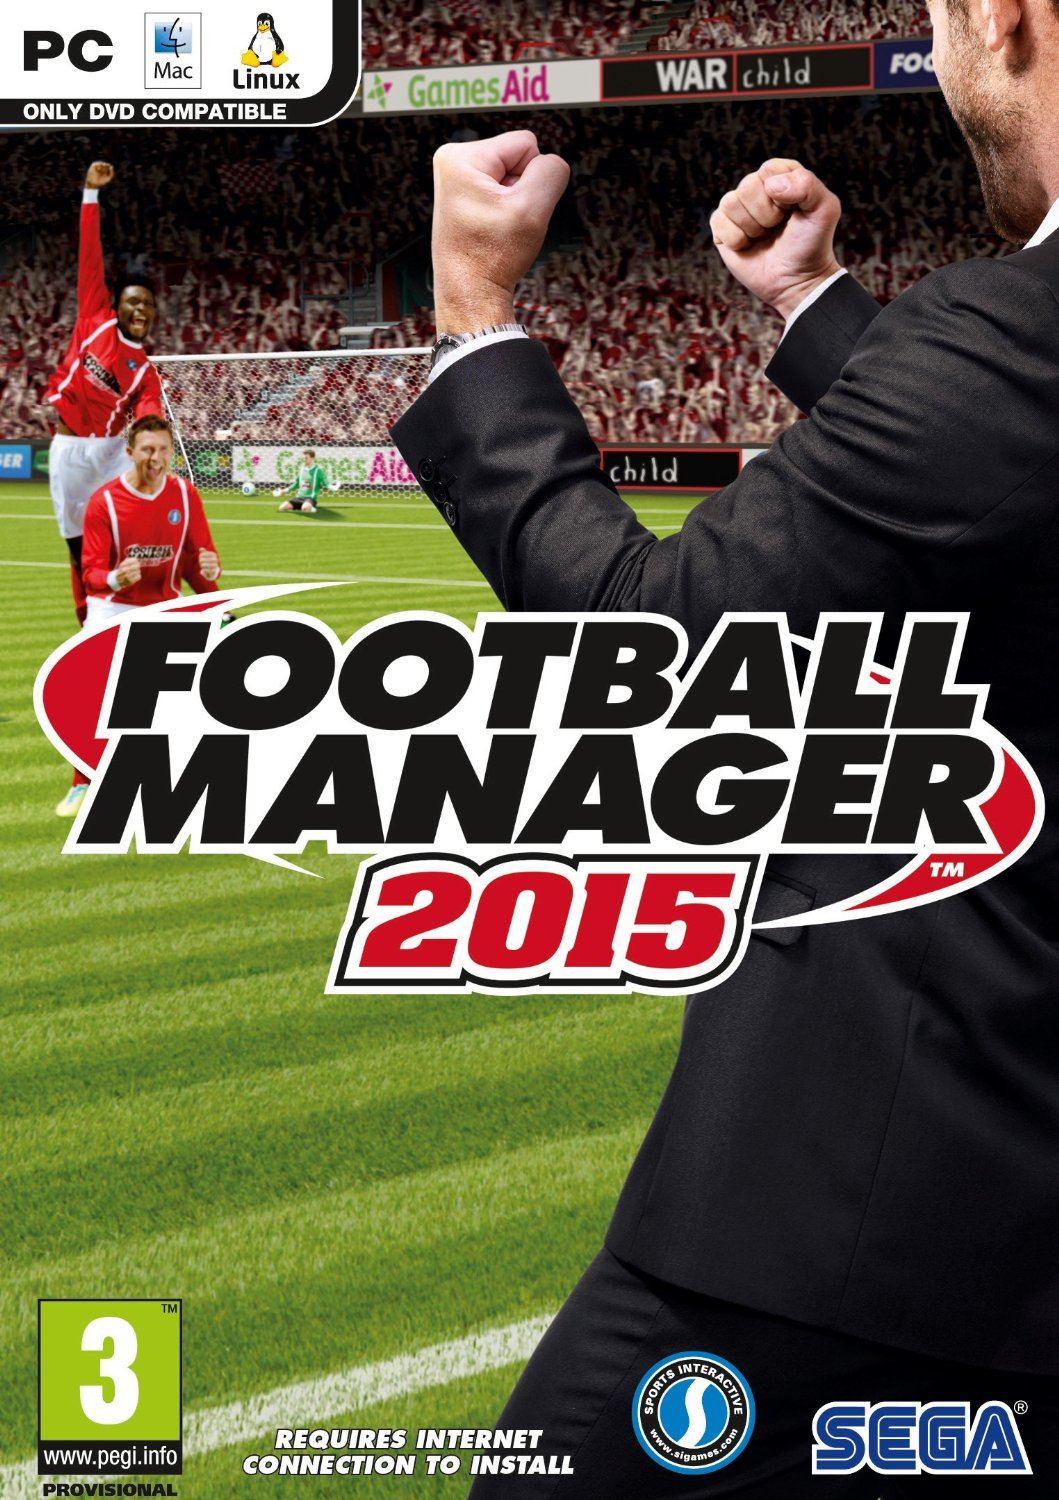 football manager 2015 linux